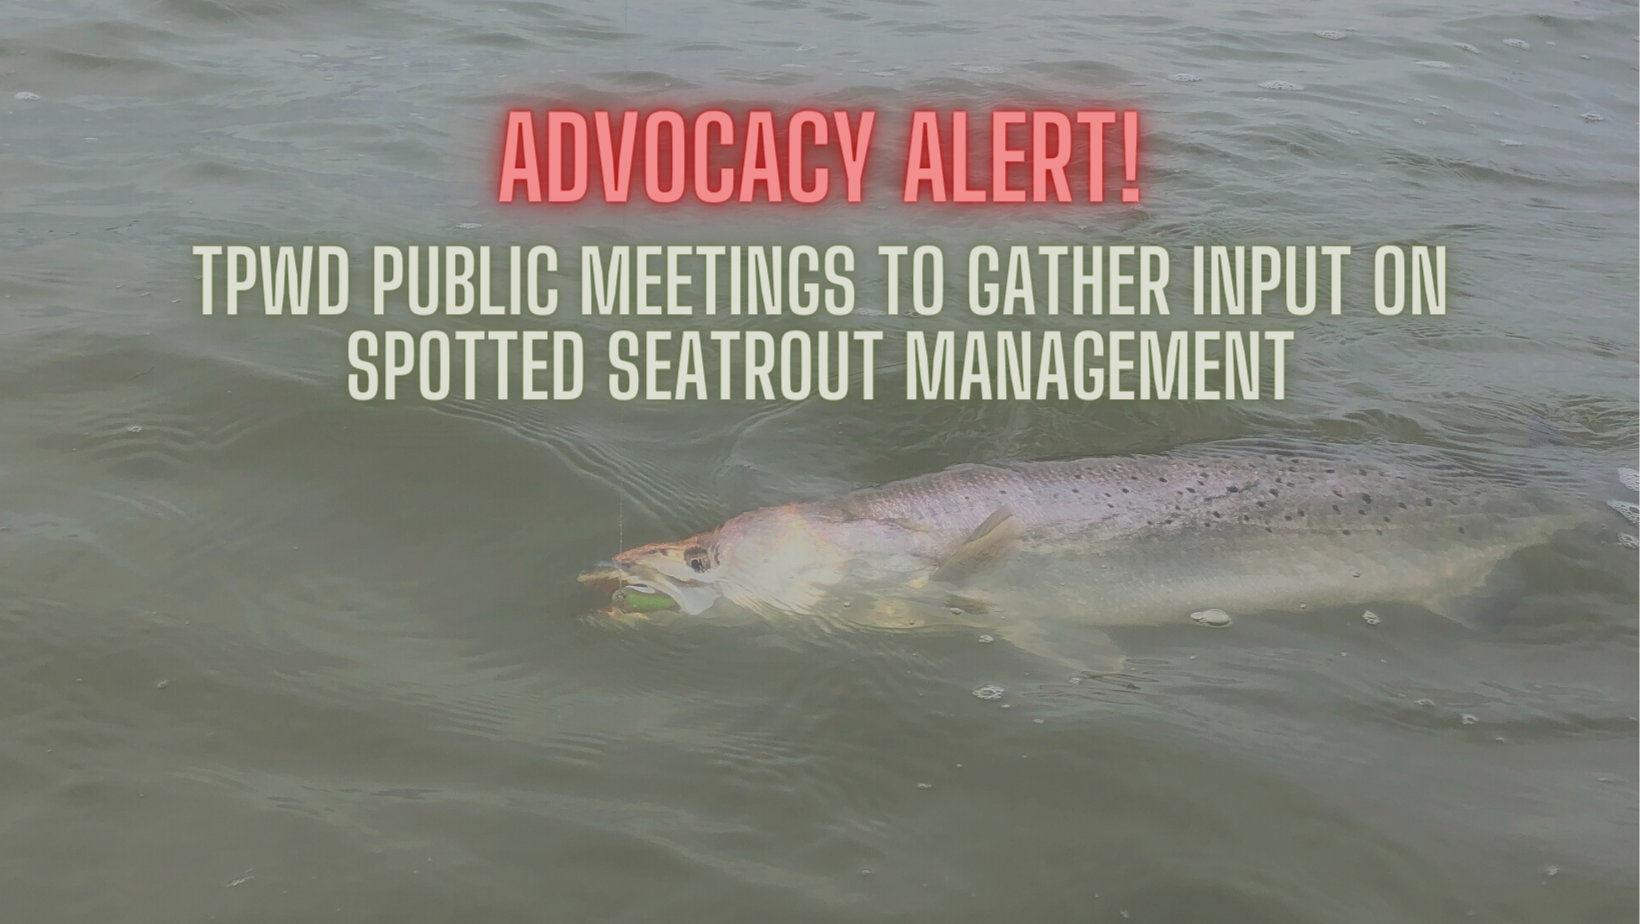 ADVOCACY ALERT: TPWD Public Meetings to Gather Input on Spotted Seatrout Management